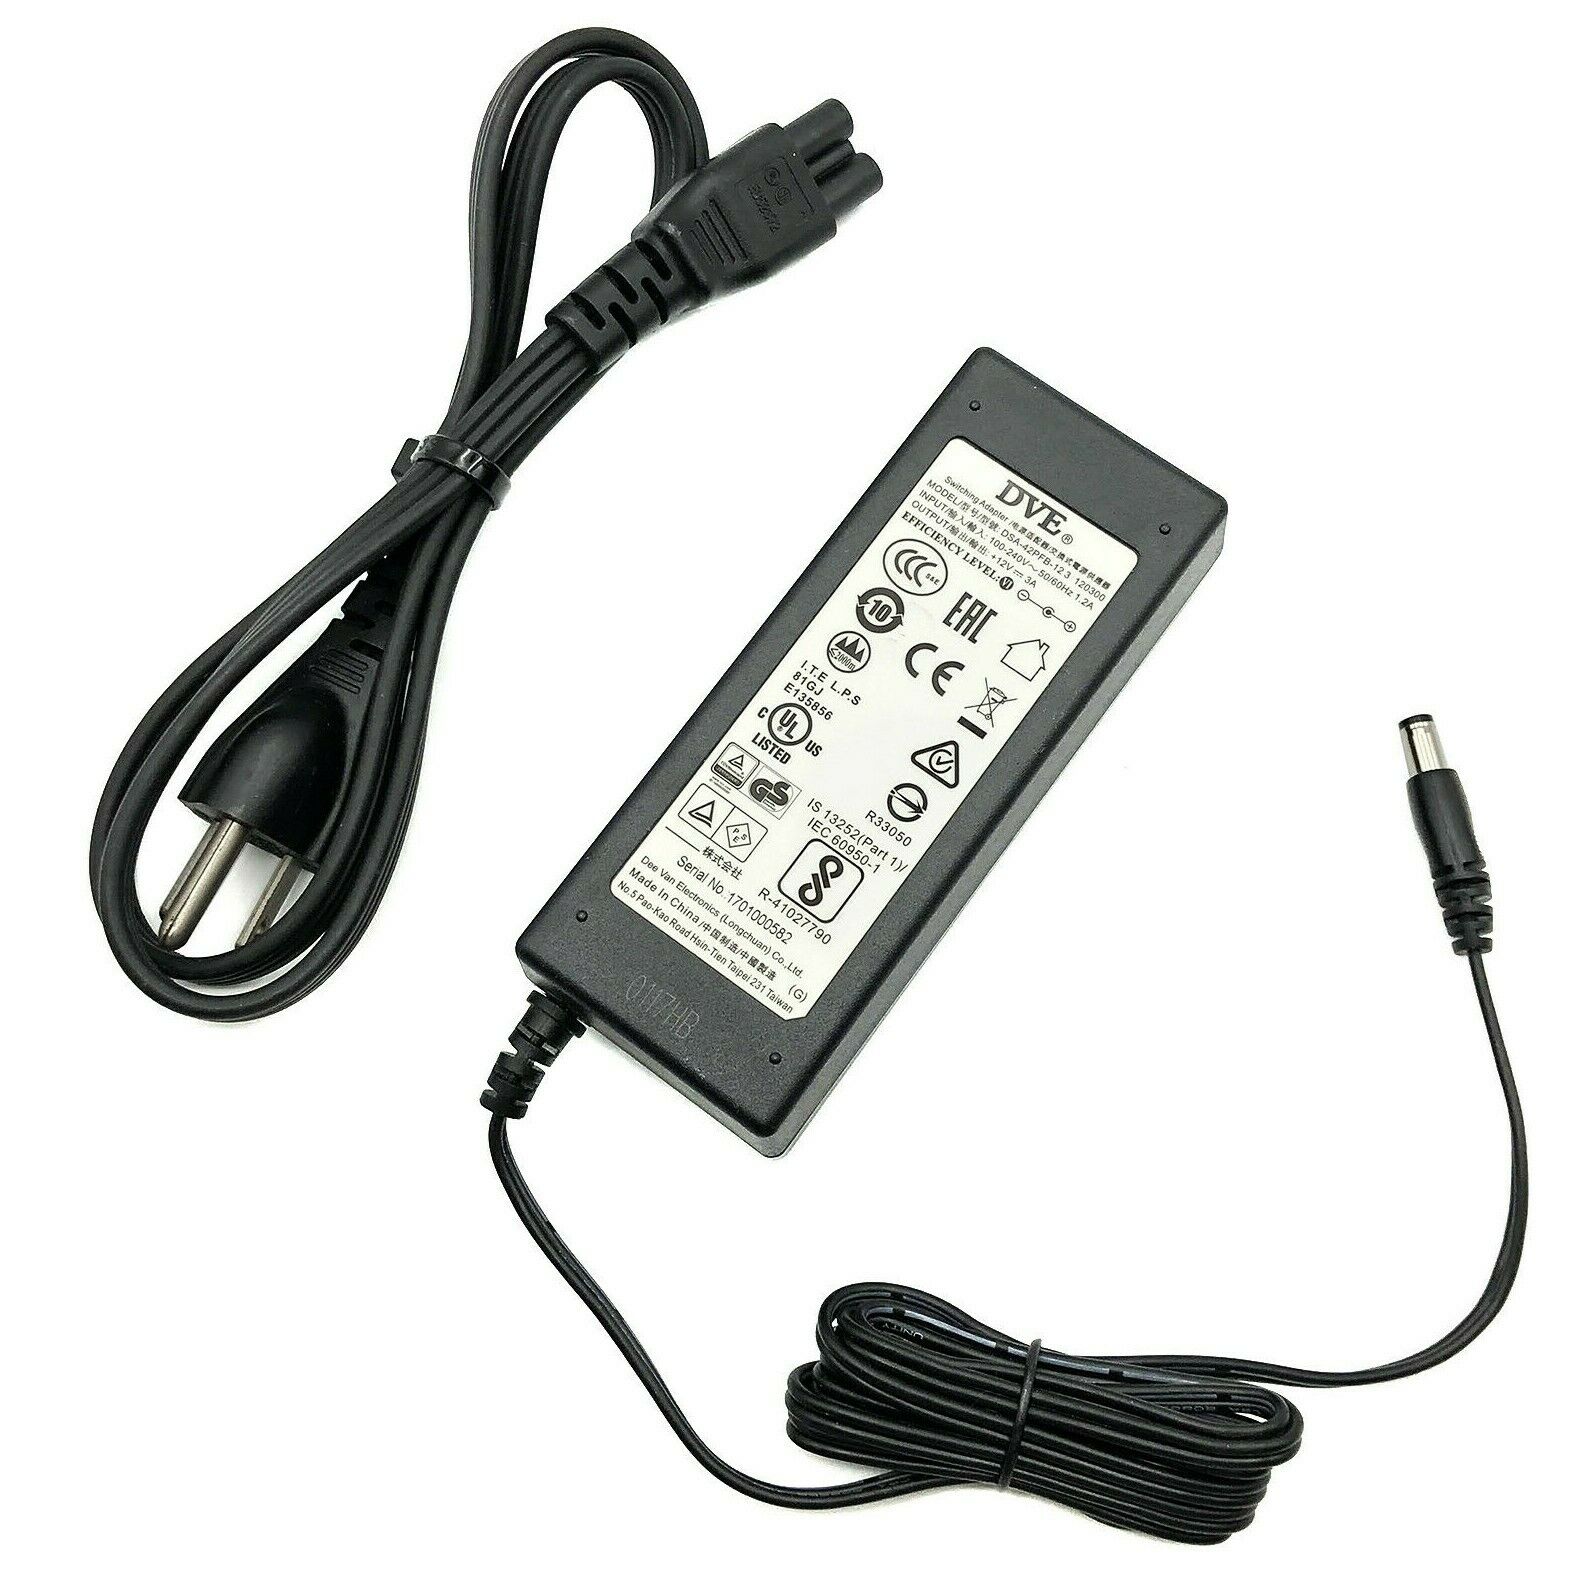 Genuine DVE AC Adapter For Sony D-VE7000S DVD Walkman Player Charger w/PC OEM Com